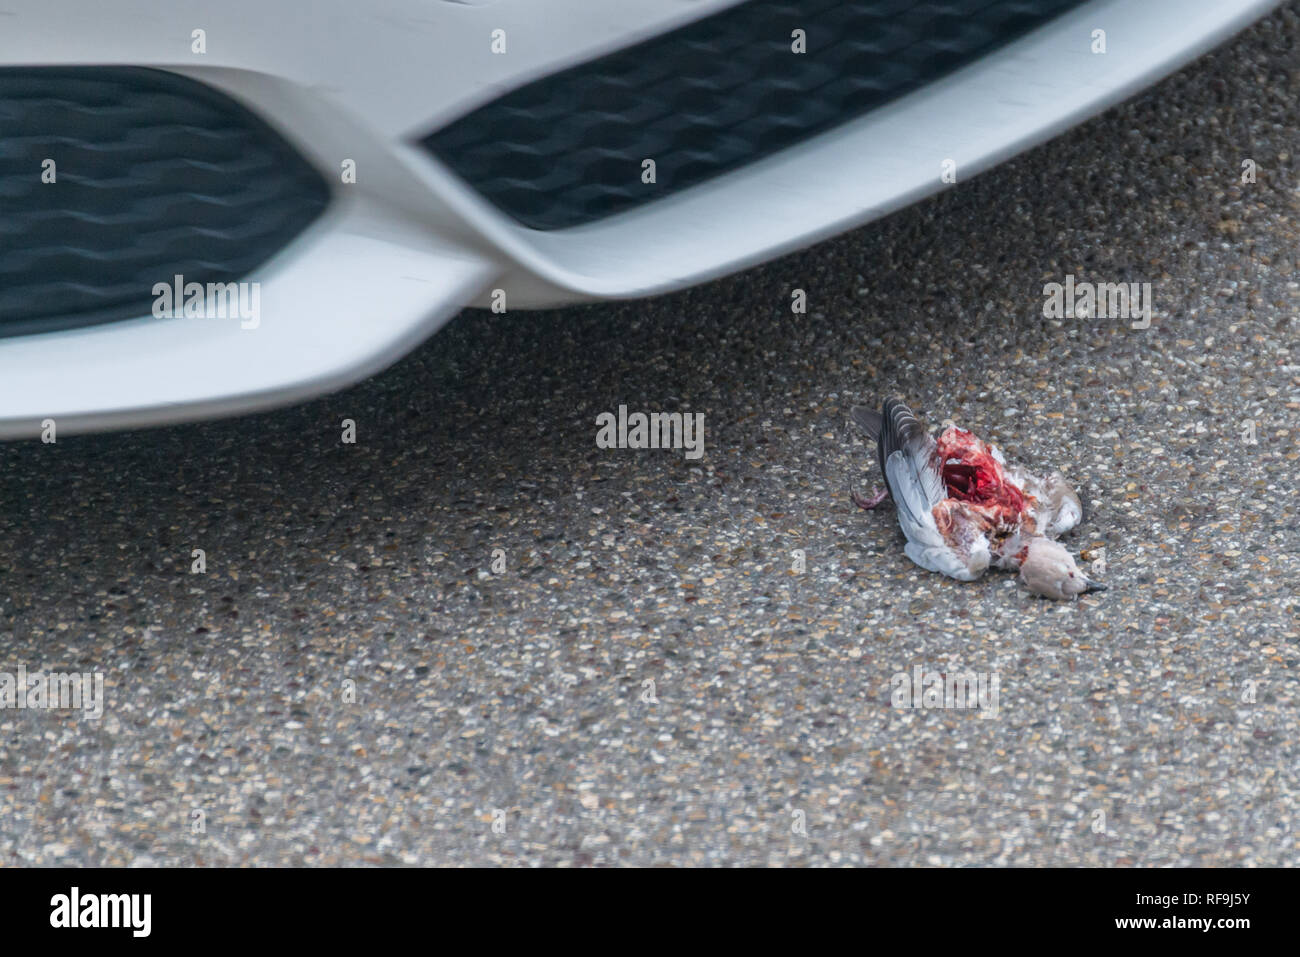 A dead bird on the road run over by a car, Germany Stock Photo